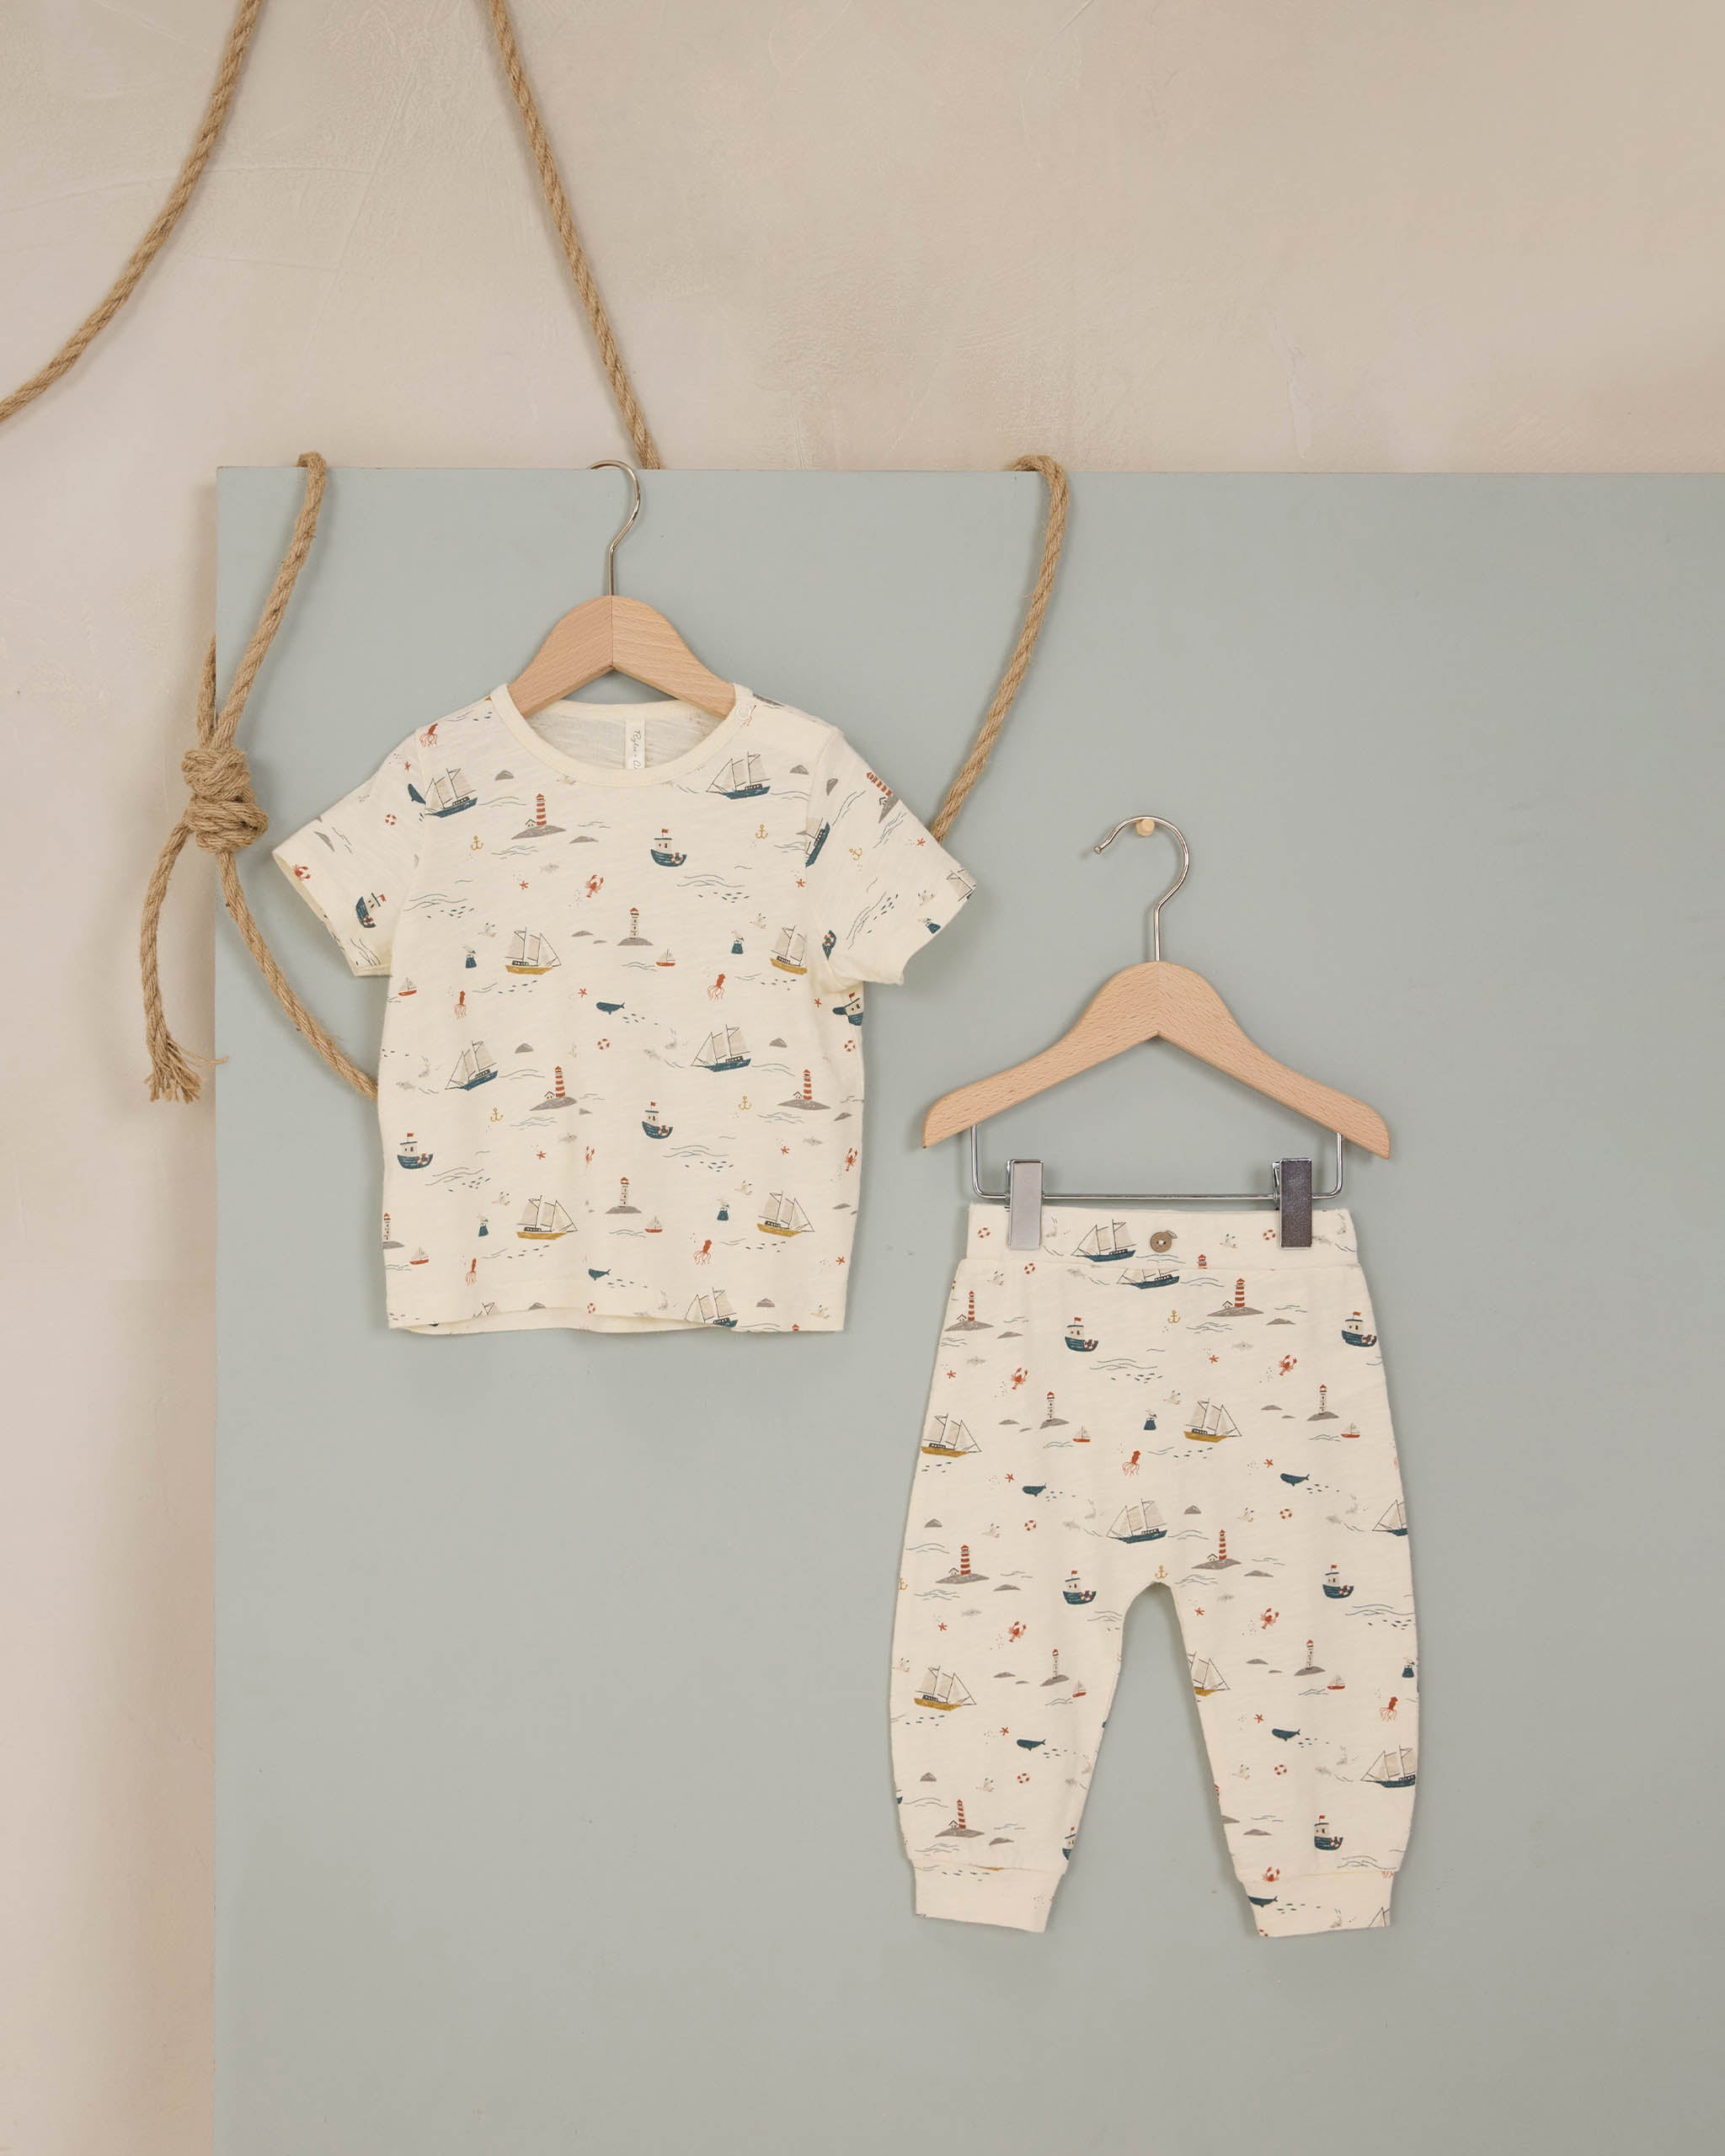 Tee + Slouch Pant Set || Nautical - Rylee + Cru | Kids Clothes | Trendy Baby Clothes | Modern Infant Outfits |